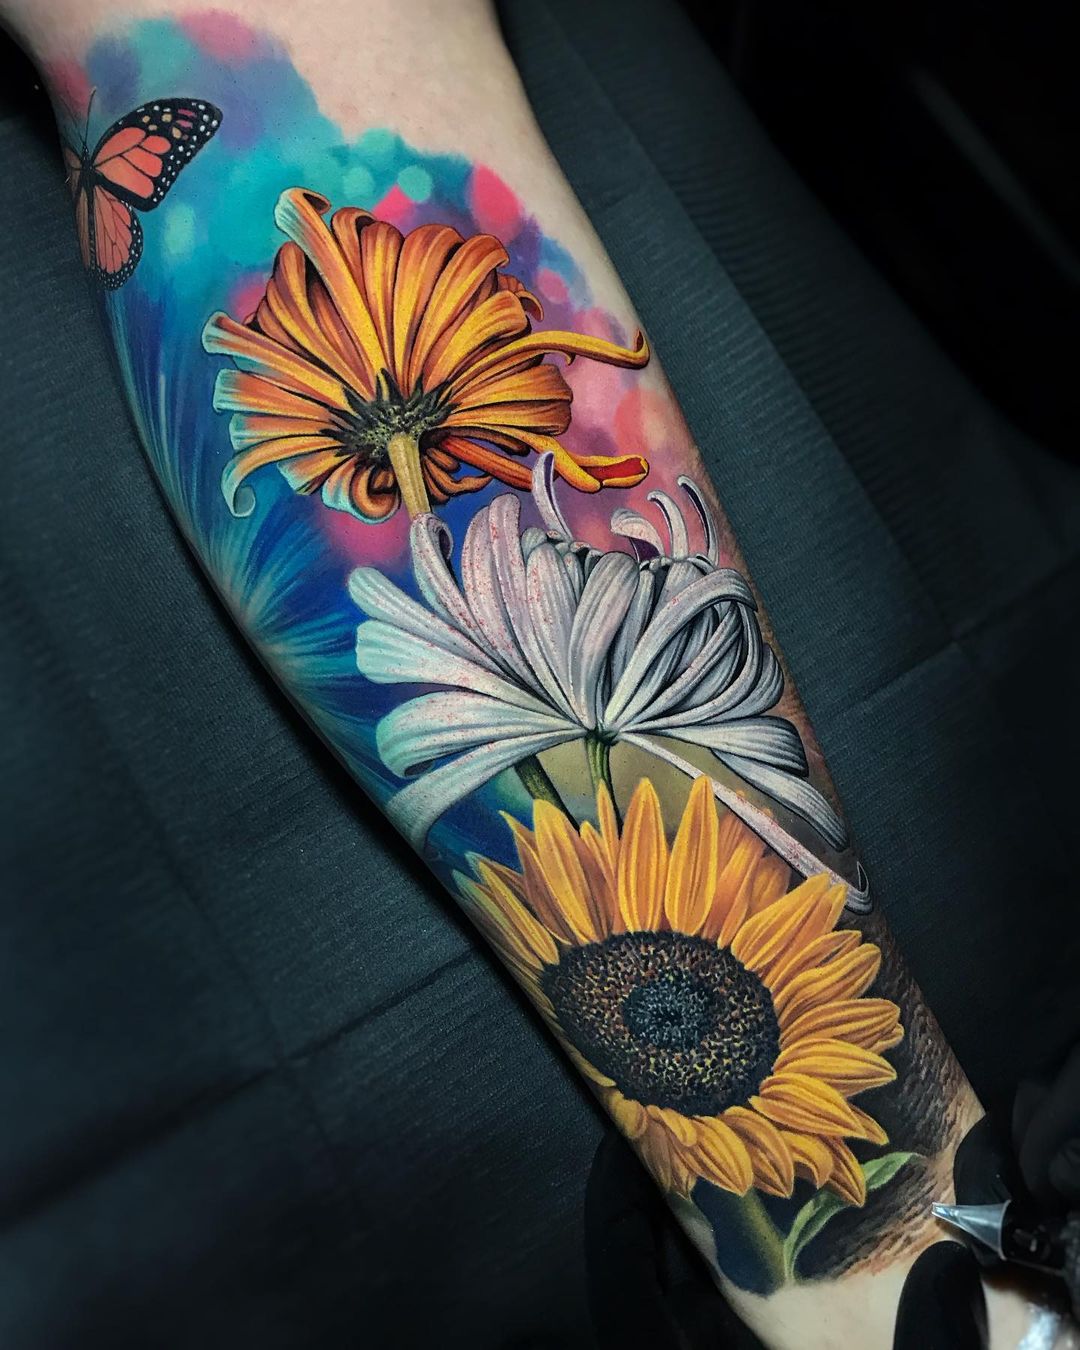 Sunflower tattoo | Gallery posted by Maria 🖤 | Lemon8